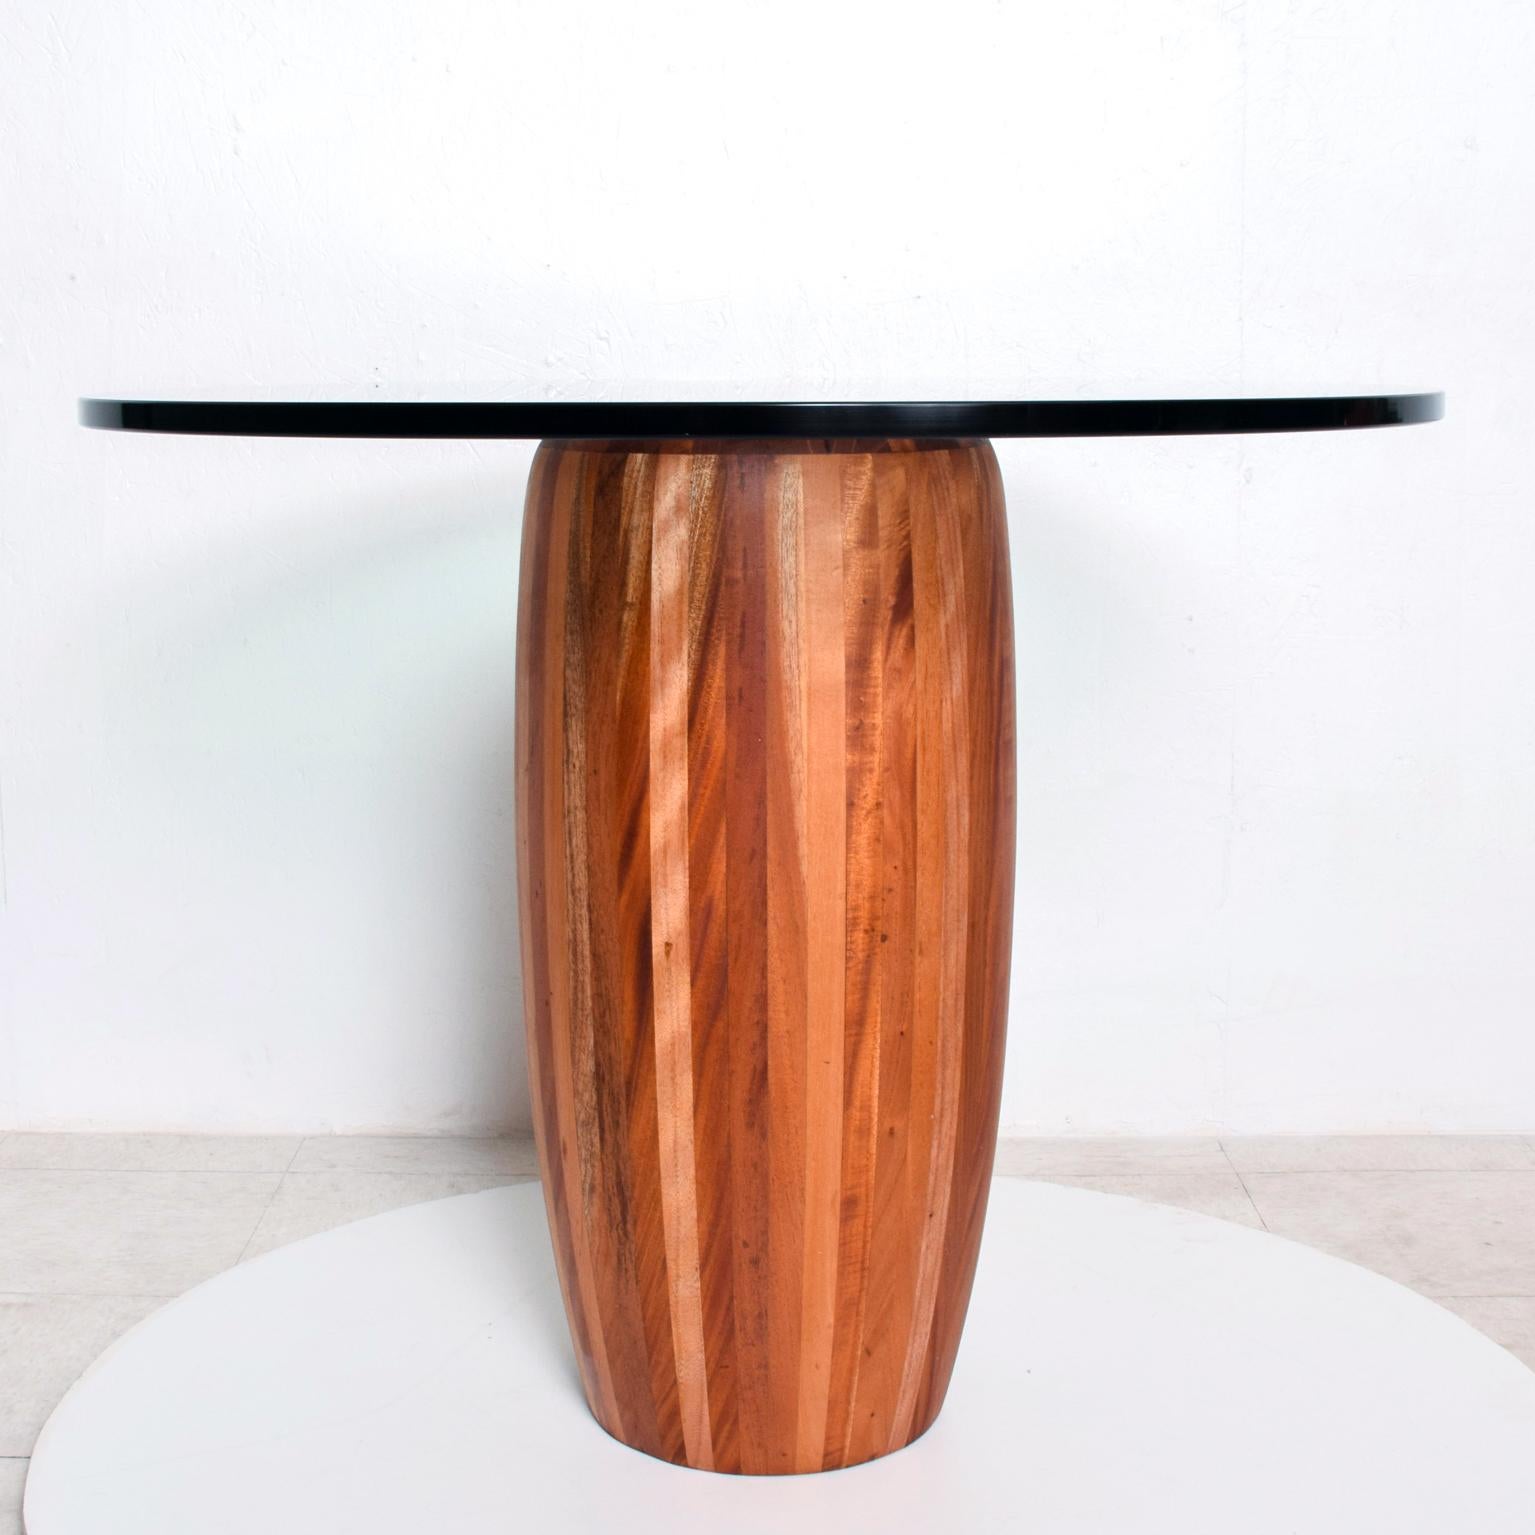 Center Table
Solid Cedar Wood Pedestal Round Center Table from Mexico 1980s Modern
Pedestal base in solid cedar wood. Glass top is about .75 thick with polished edges.
Unmarked, no information present from the maker.
Dimensions: 29 x 33.5
Very good